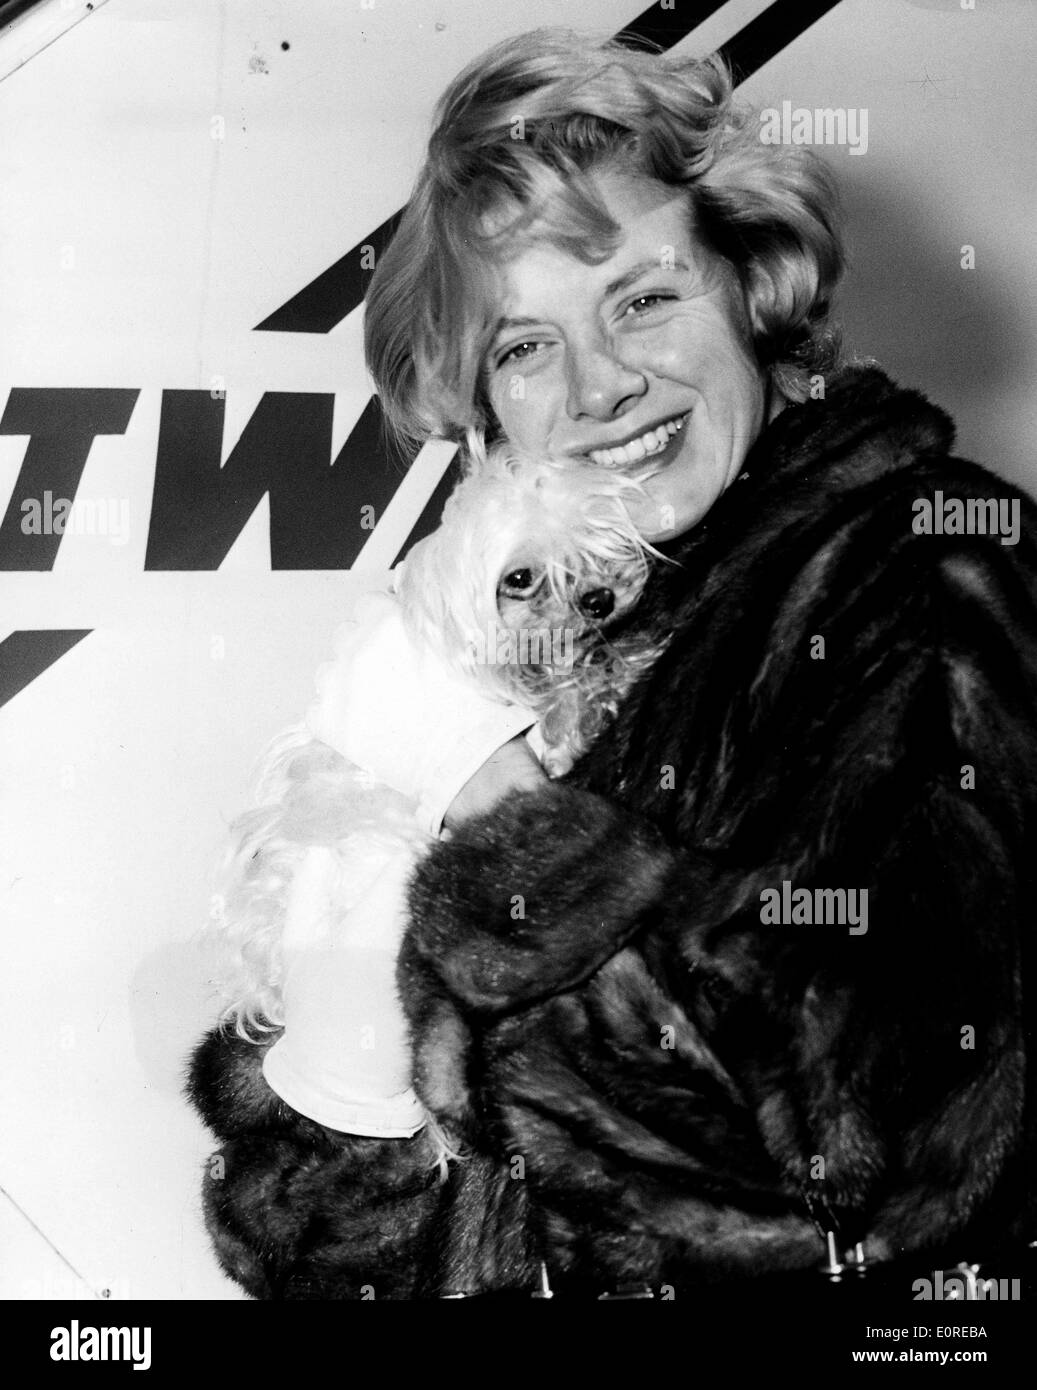 Rosemary Clooney arriving at the airport with her dog Schnookie Stock Photo